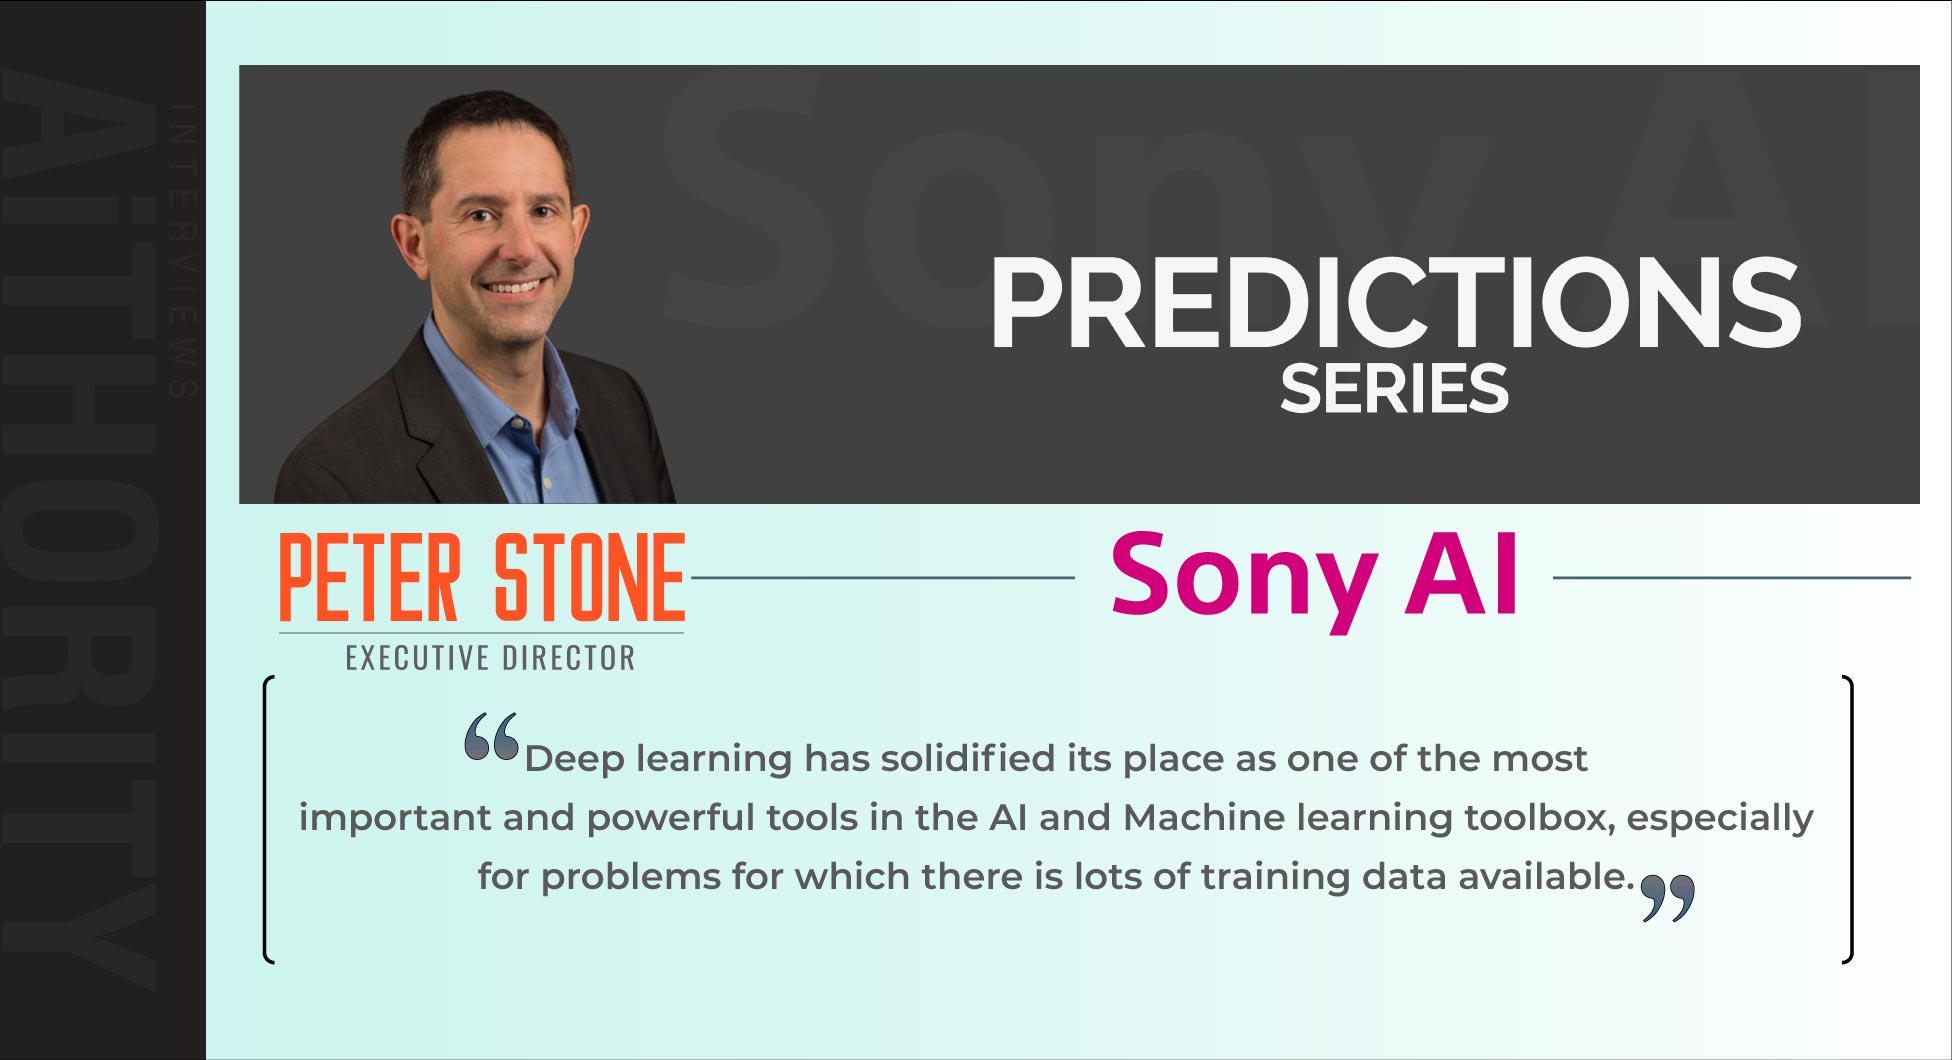 Peter Stone, Executive Director at Sony AI